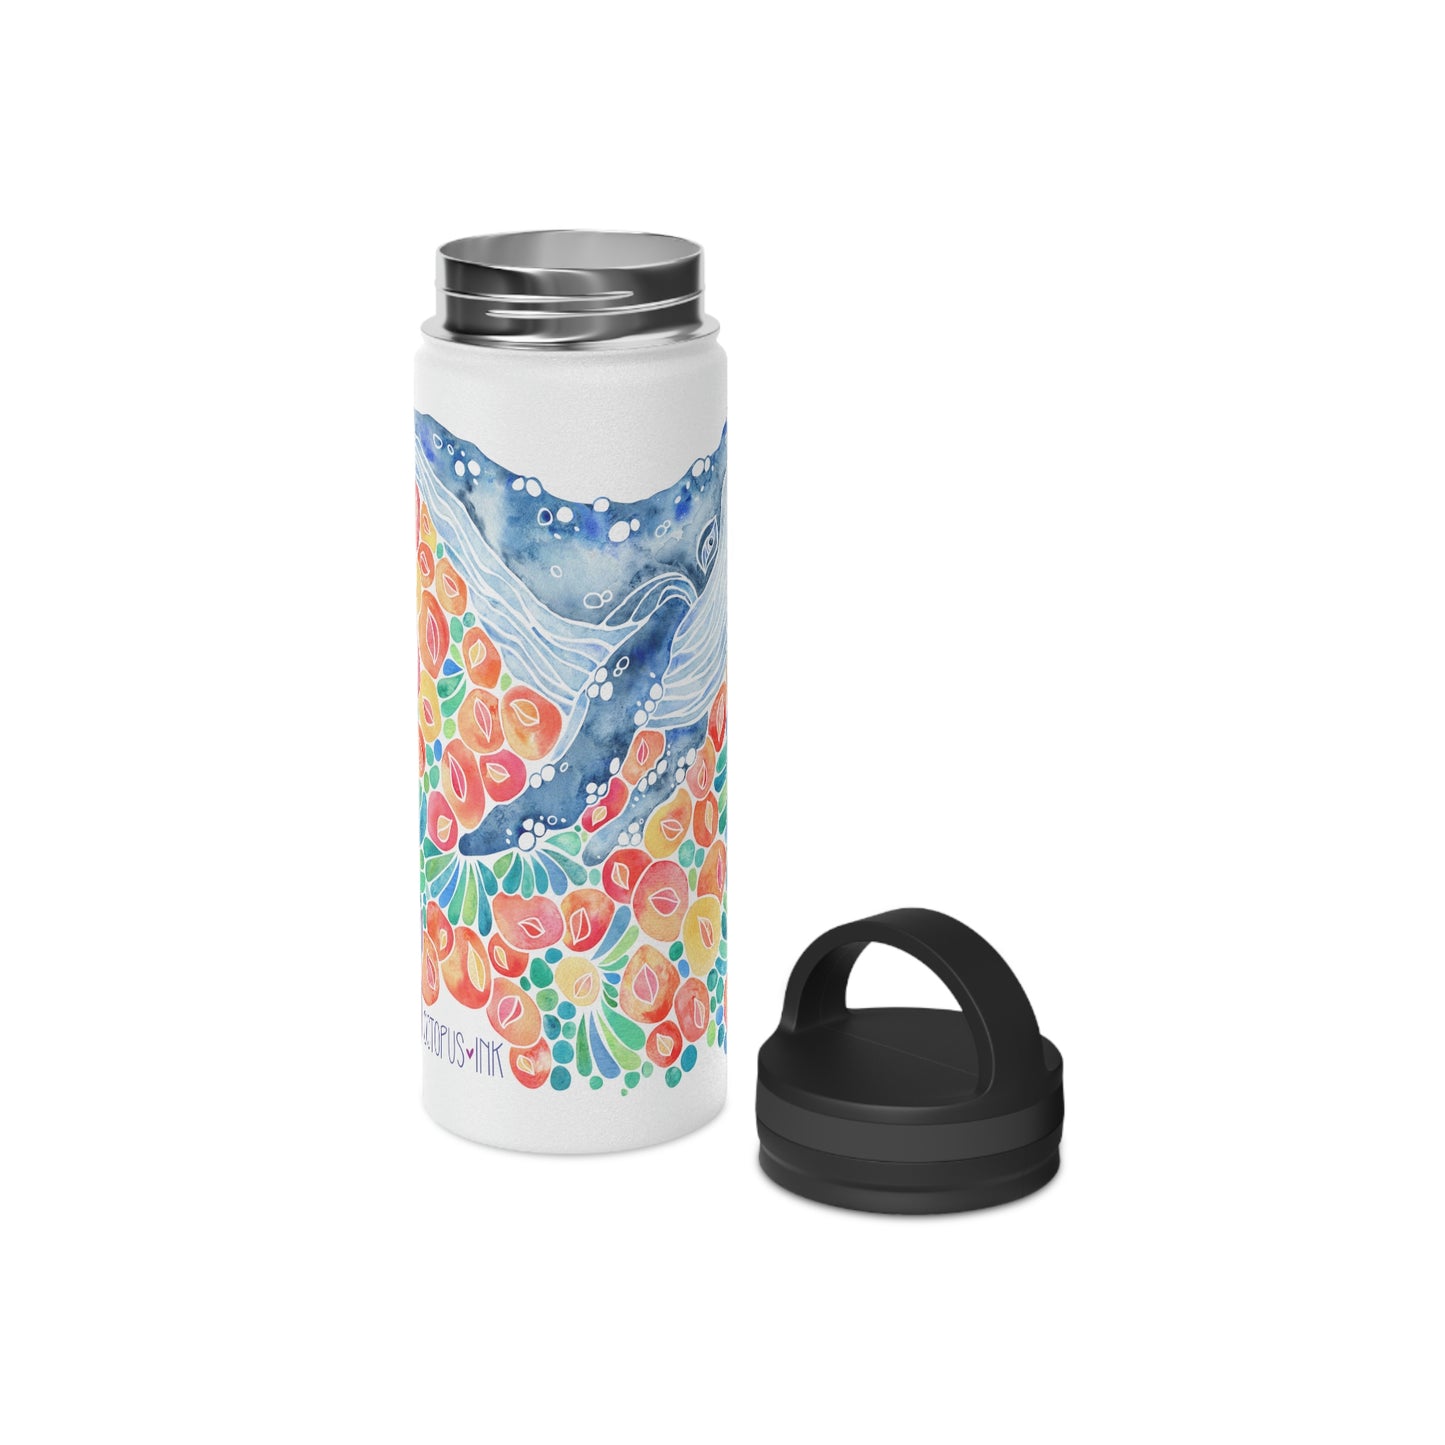 Barnacle Whale- 18oz Stainless Steel Water Bottle